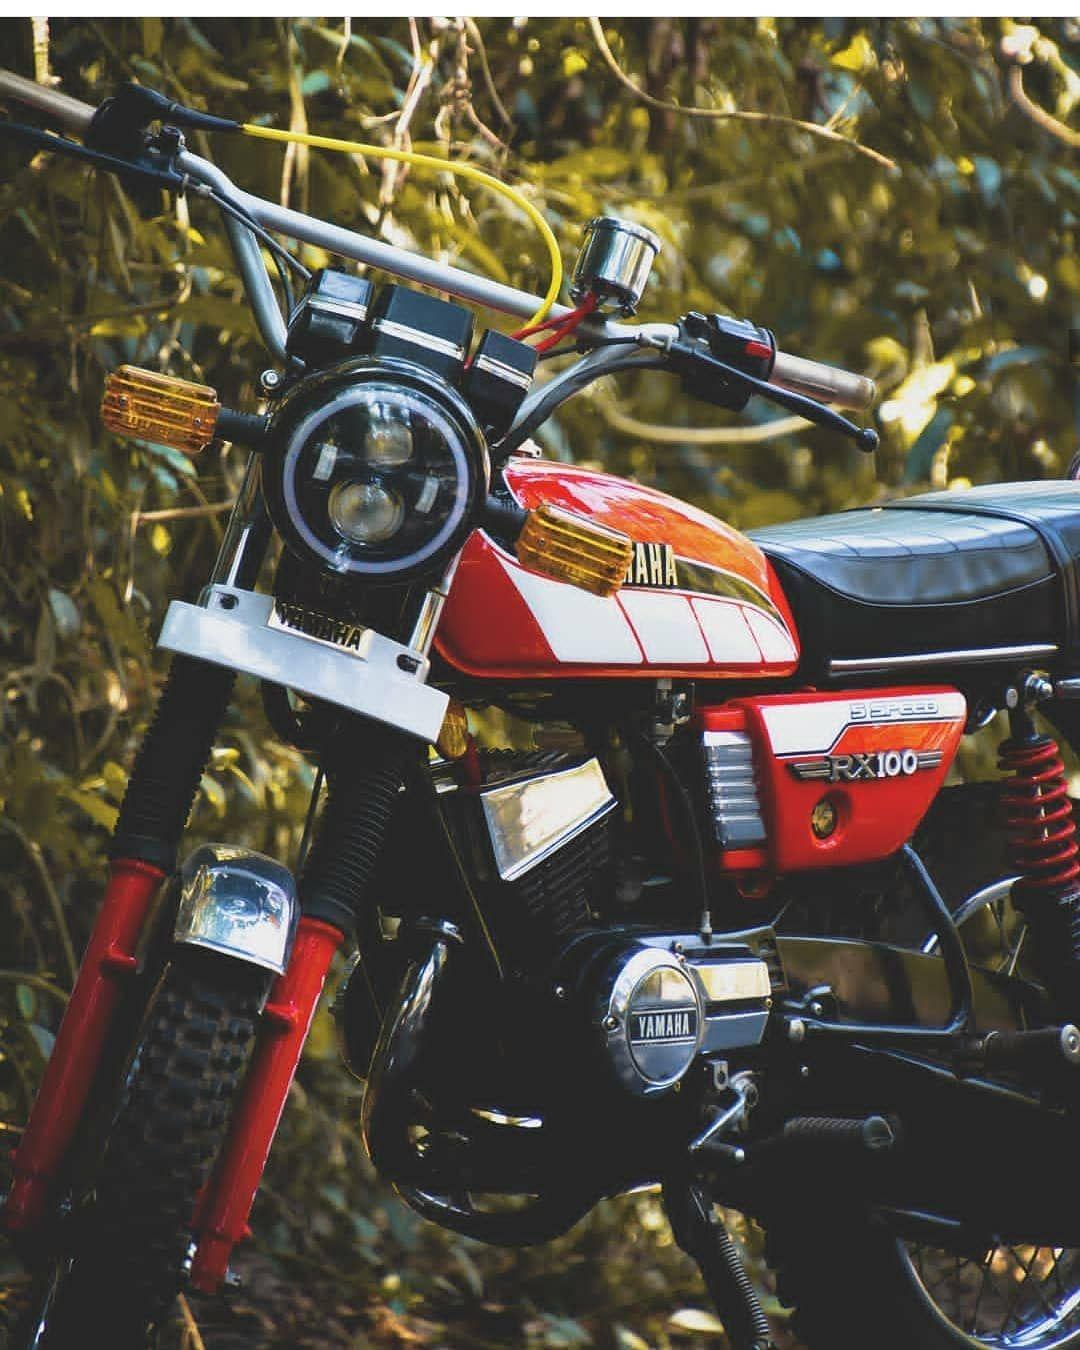 Rx 100 bike Wallpapers Download  MobCup